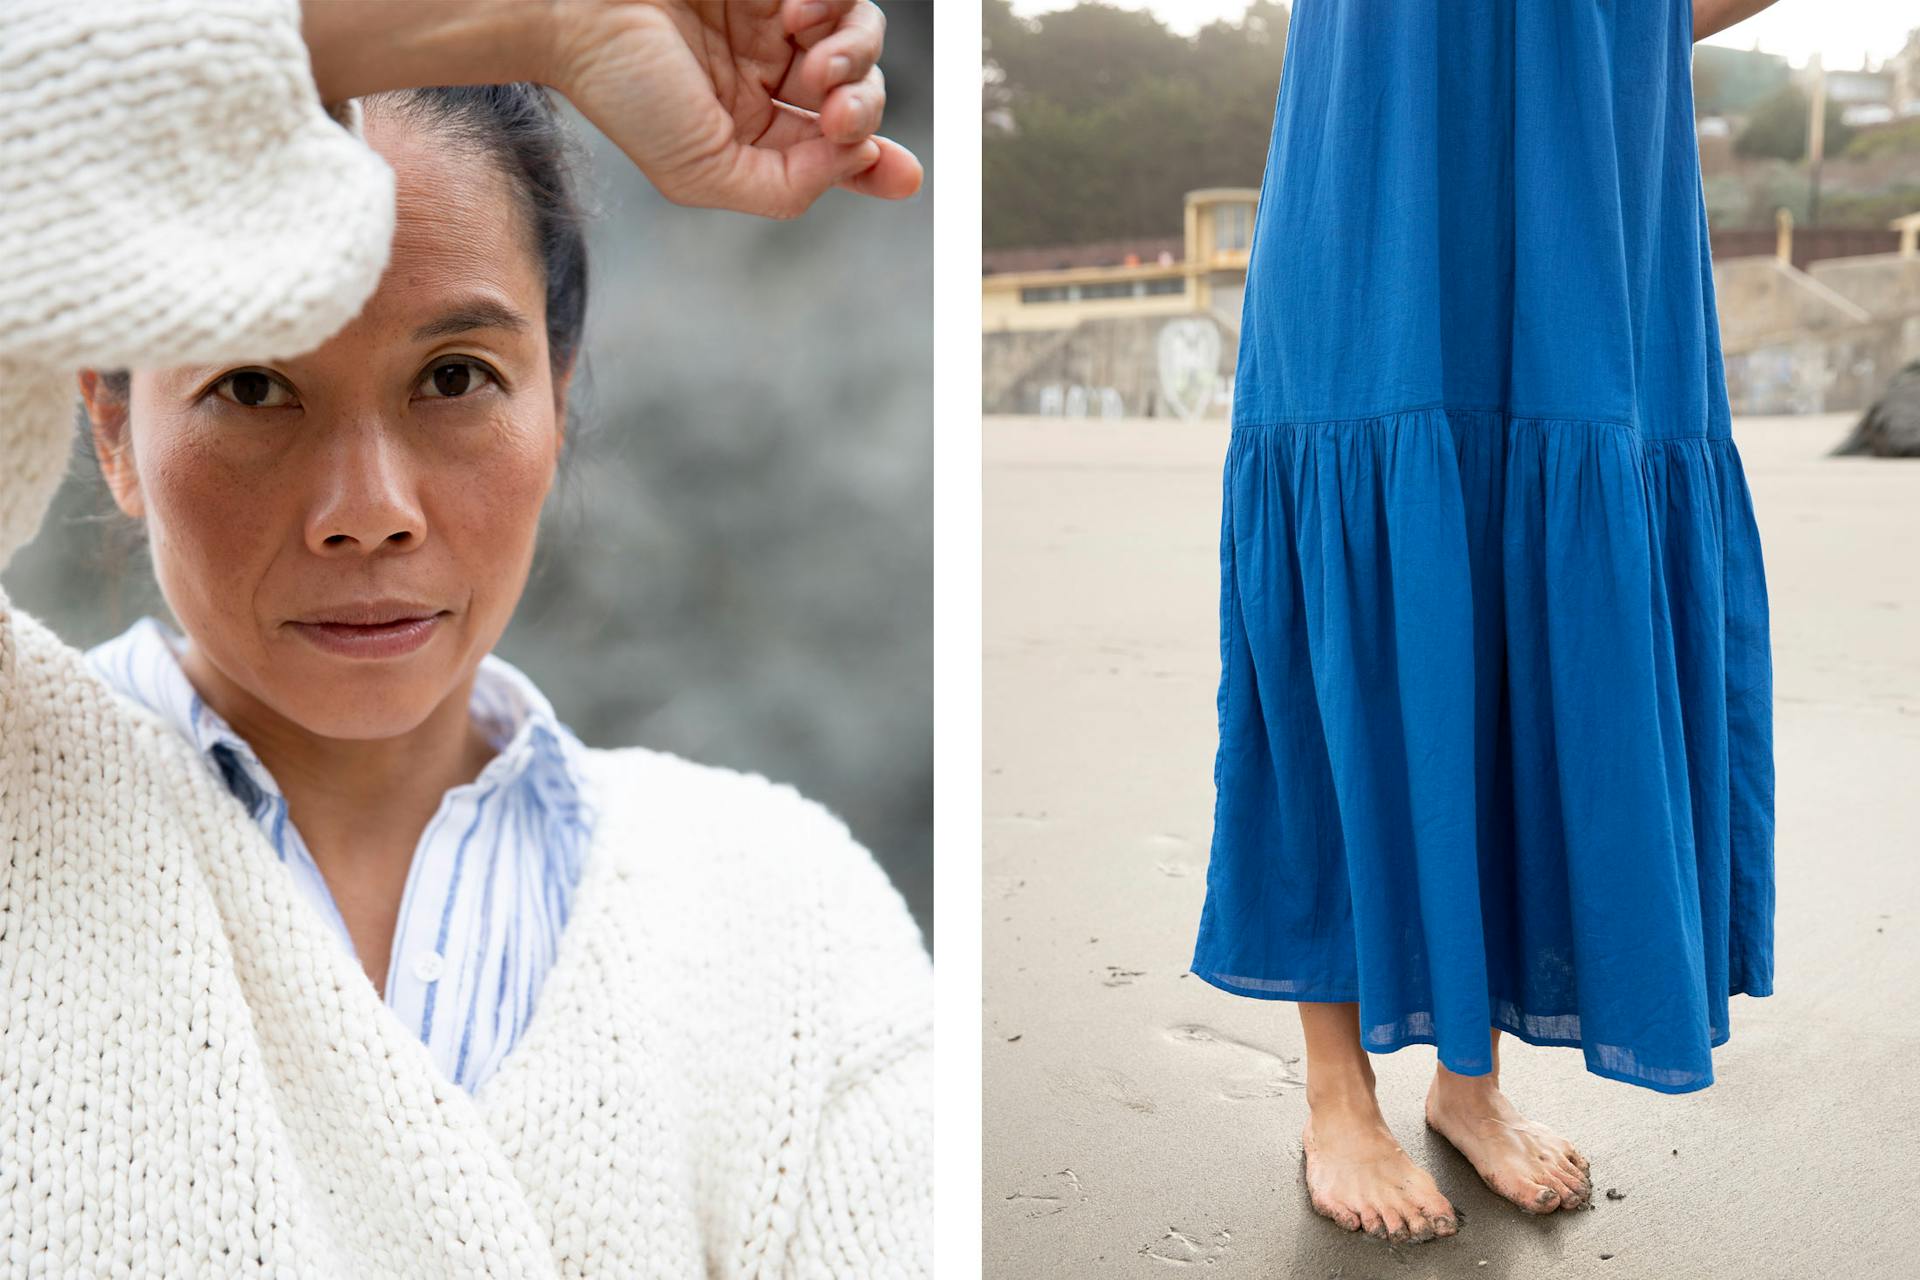 Two images. The first shows Bonnie Tsui looking into the camera. The second shows a blue skirt.